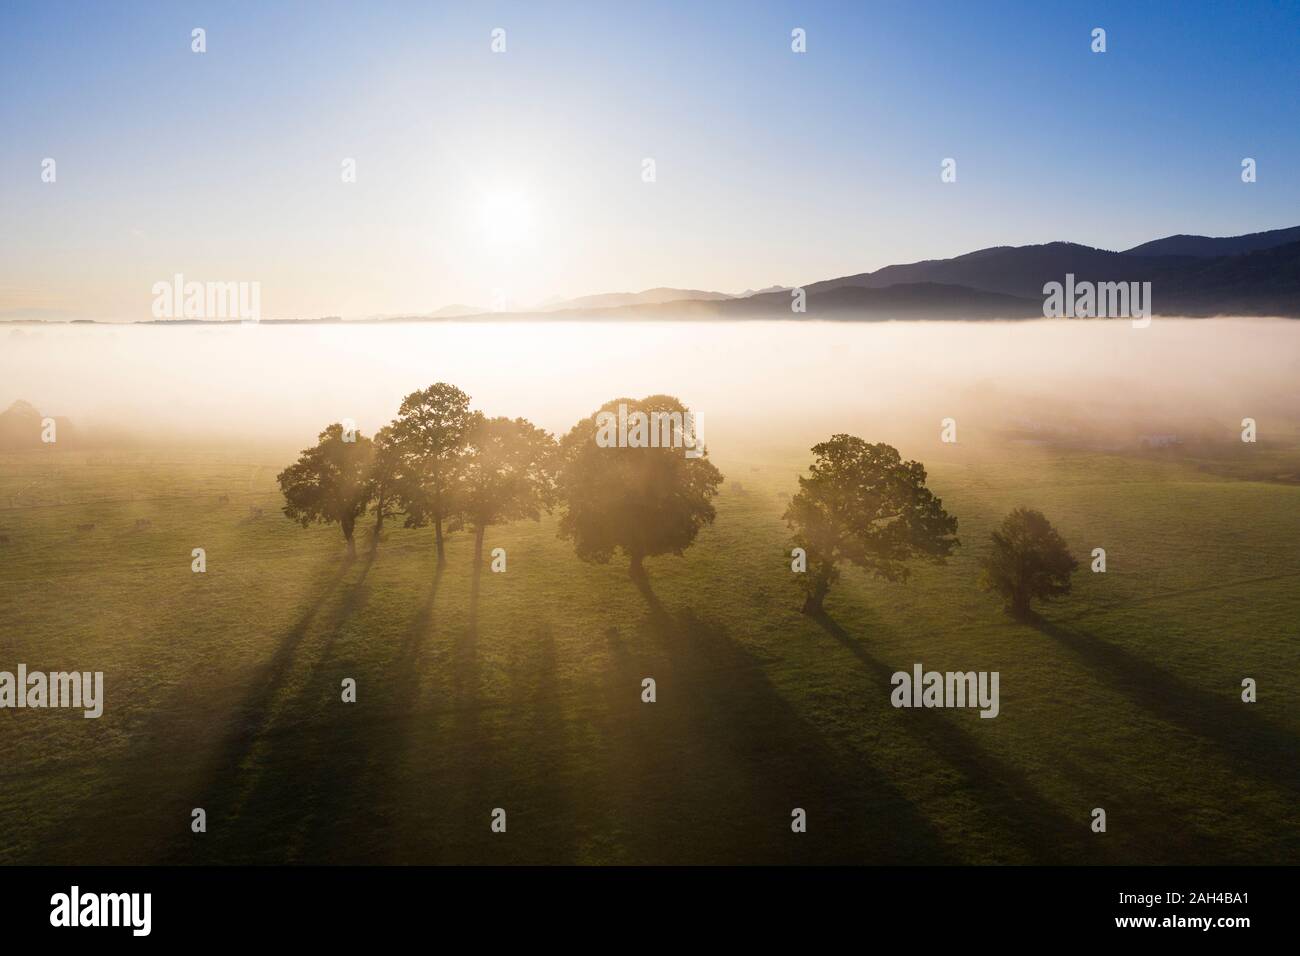 Germany, Upper Bavaria, Greiling, Aerial view of fields in fog at sunrise Stock Photo